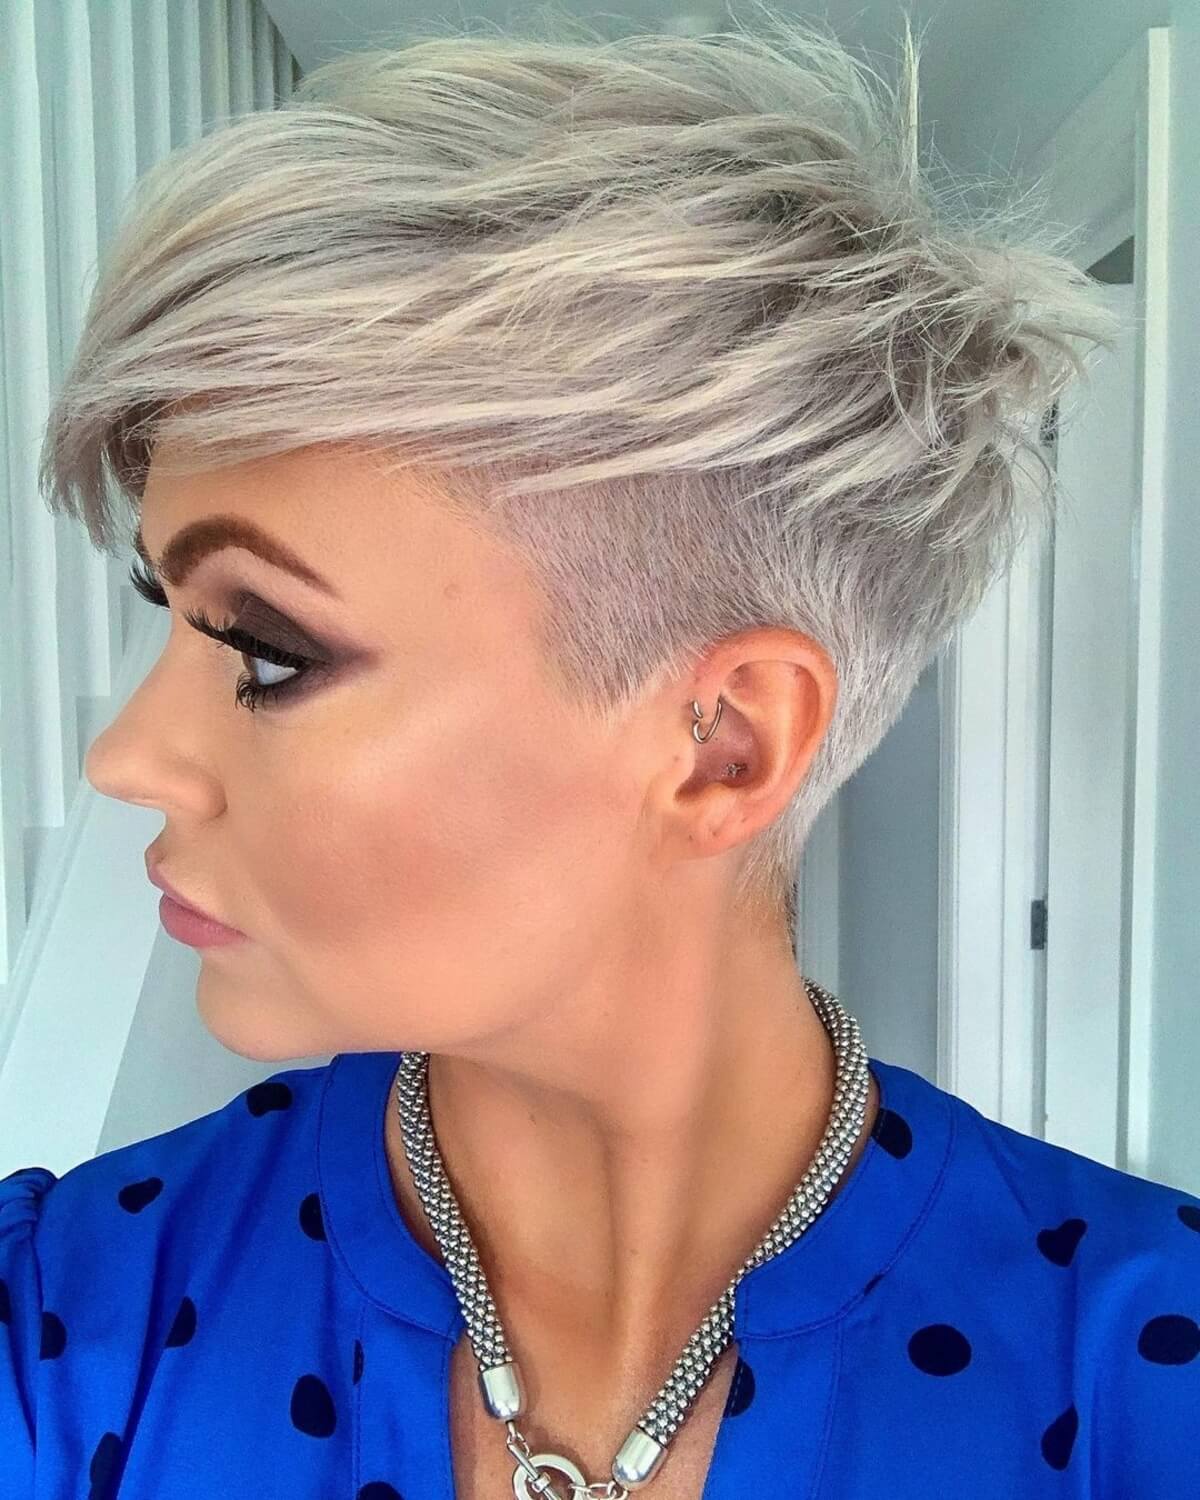 23 Edgy Short Haircuts for Women Wanting a Bold, New Style in 2021